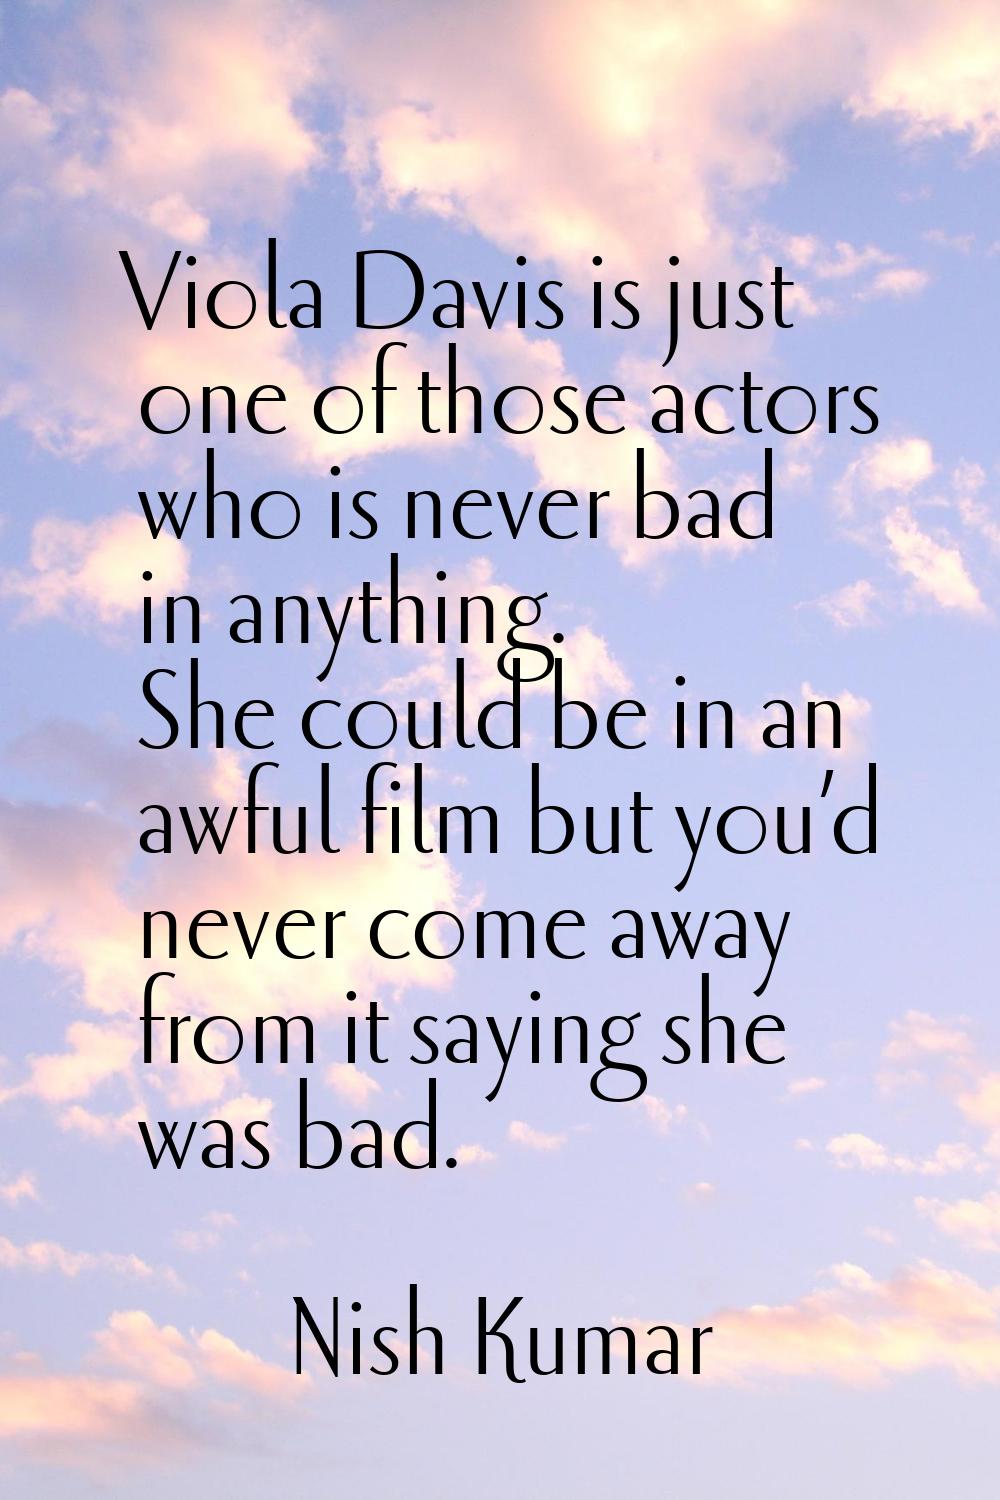 Viola Davis is just one of those actors who is never bad in anything. She could be in an awful film